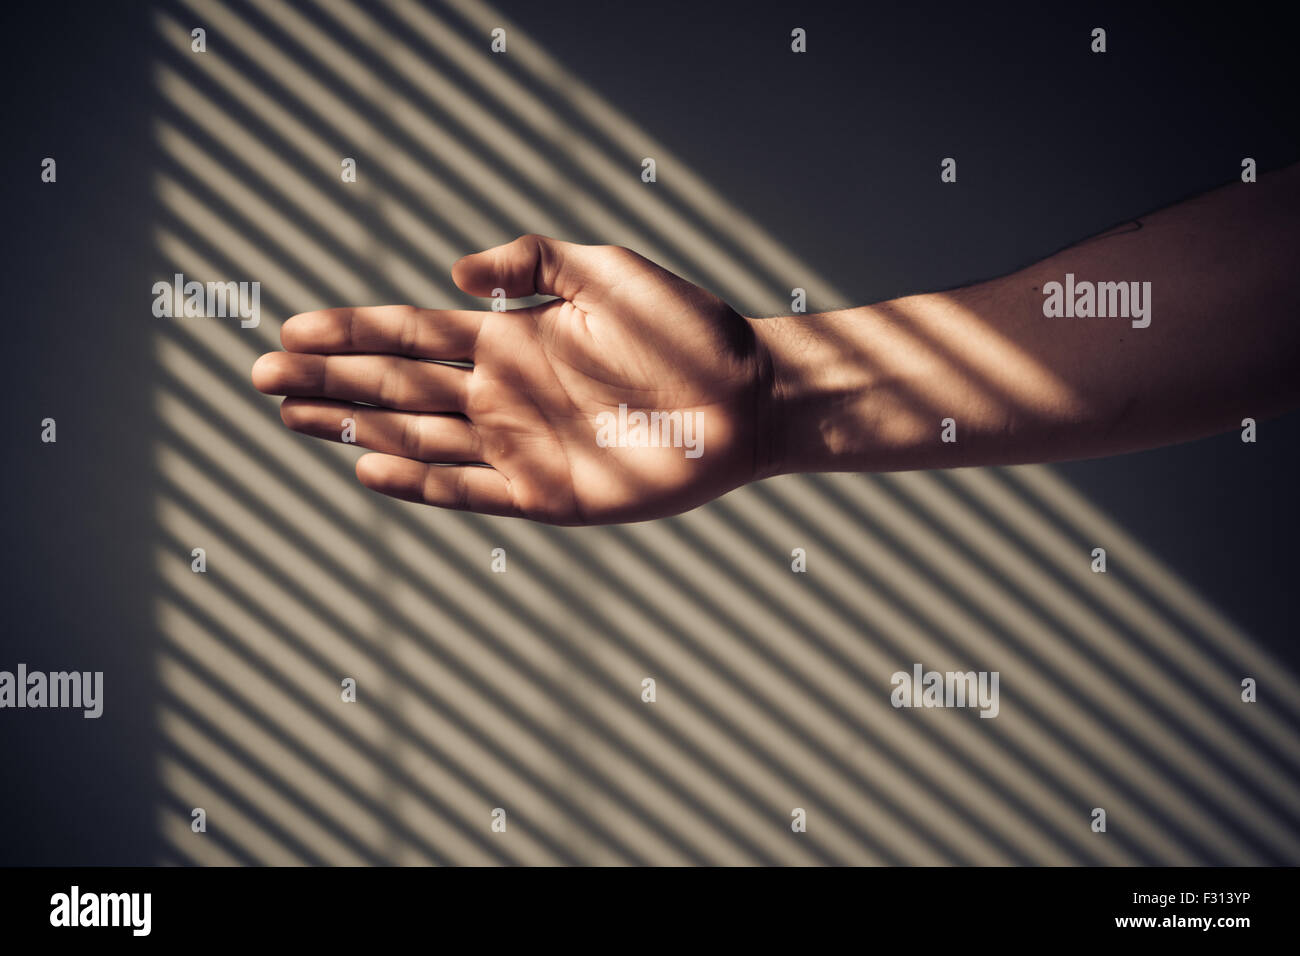 Man's hand with shadows being cast from blinds Stock Photo